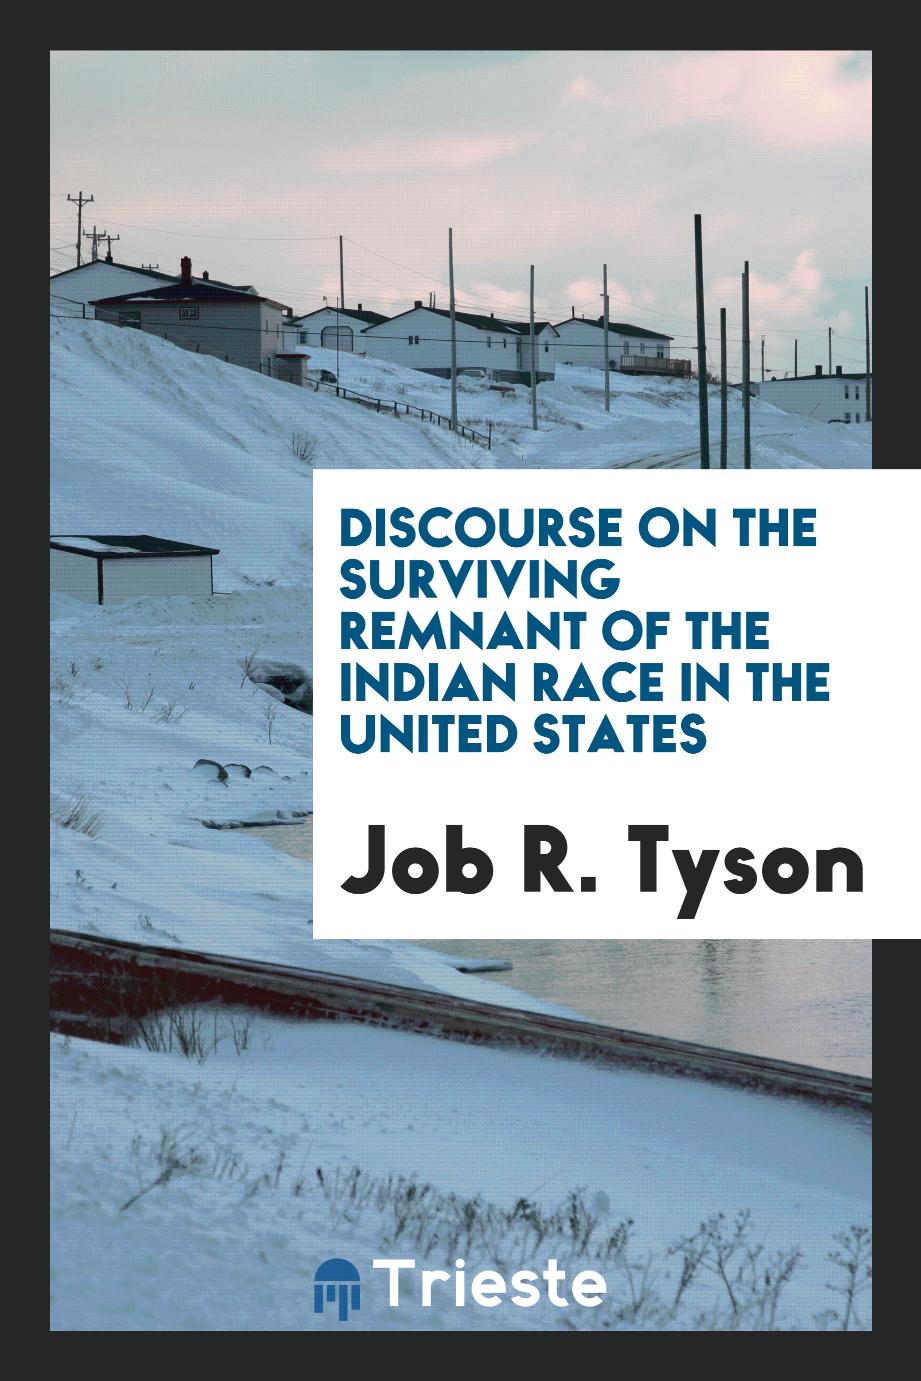 Discourse on the surviving remnant of the Indian race in the United States